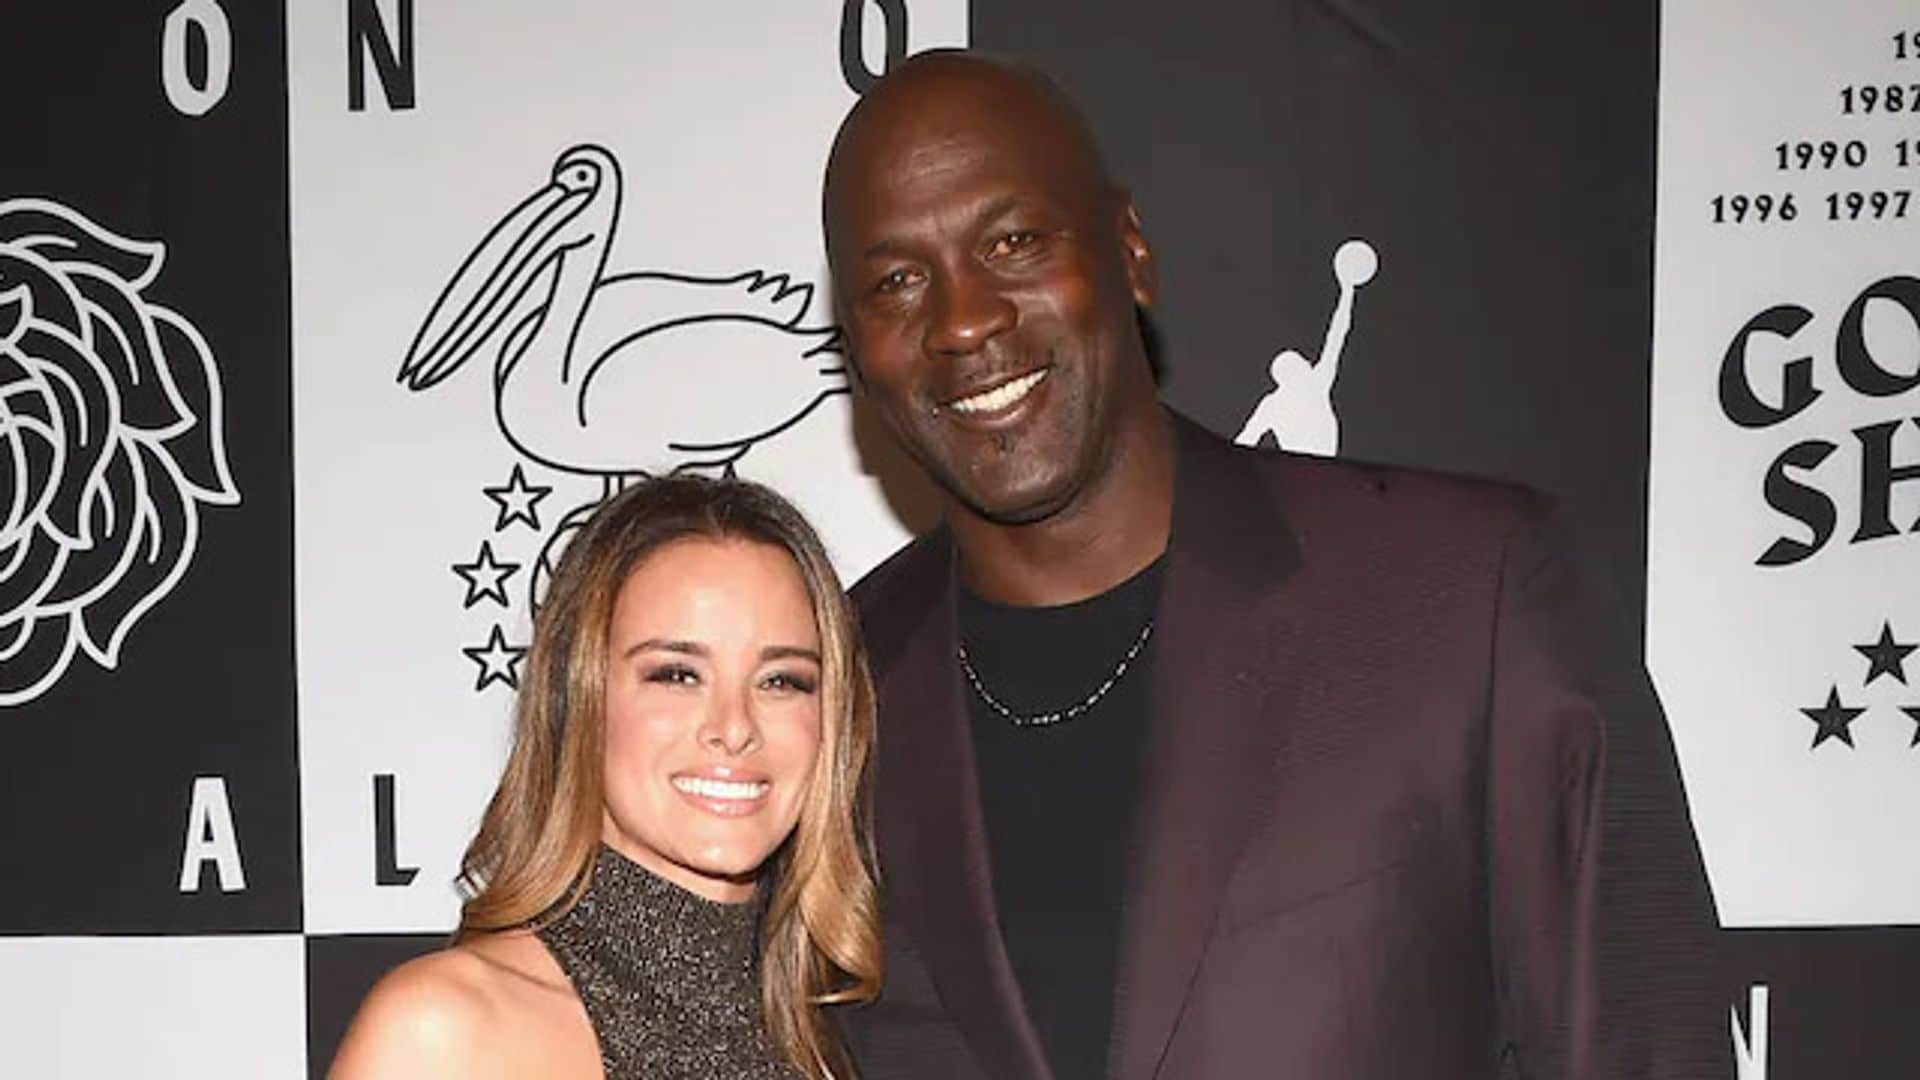 Michael Jordan and Yvette Prieto enjoy Italy with their twins in rare outing [VIDEO]